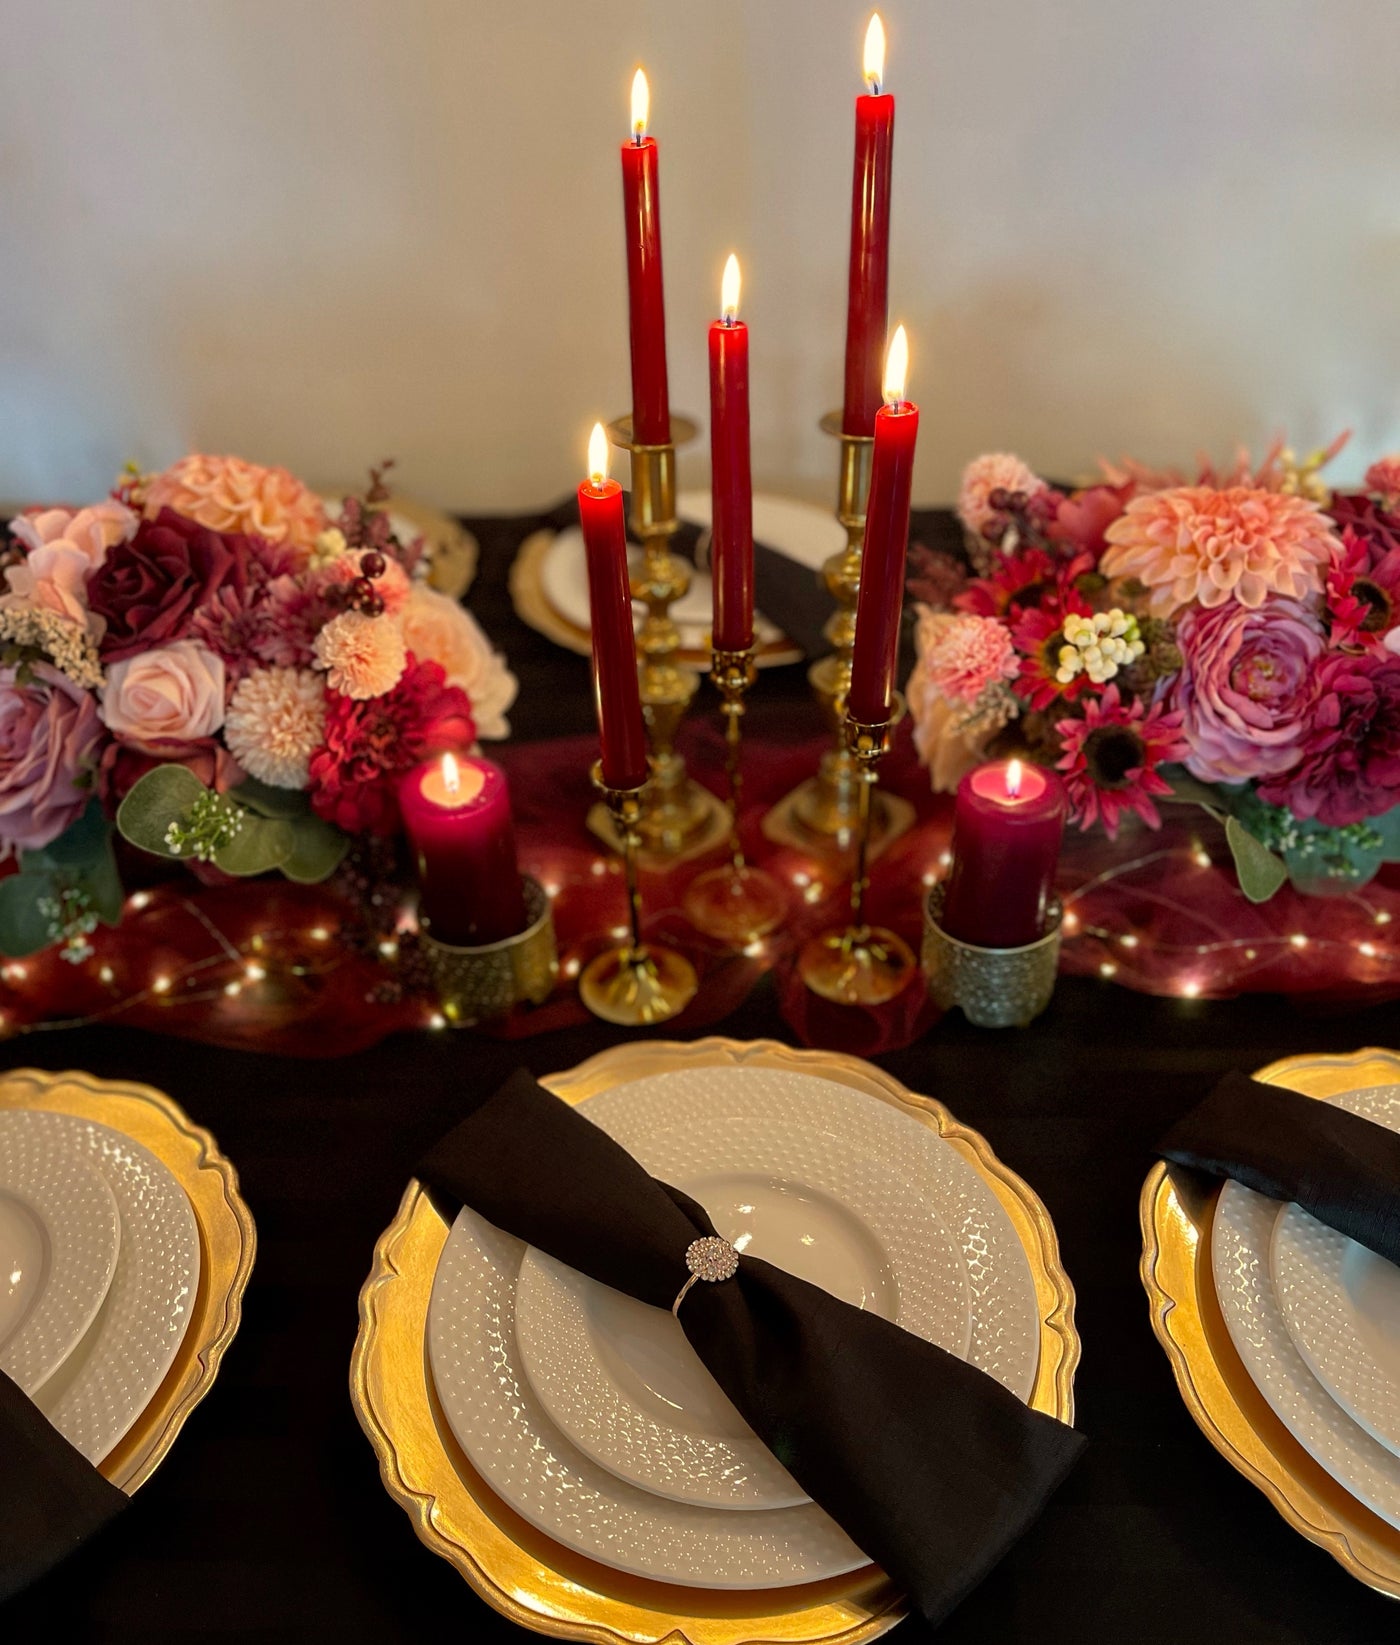 Rent a Rose- Centrepiece- Burgundy and pink flowers-  Rent for five days for $20.00